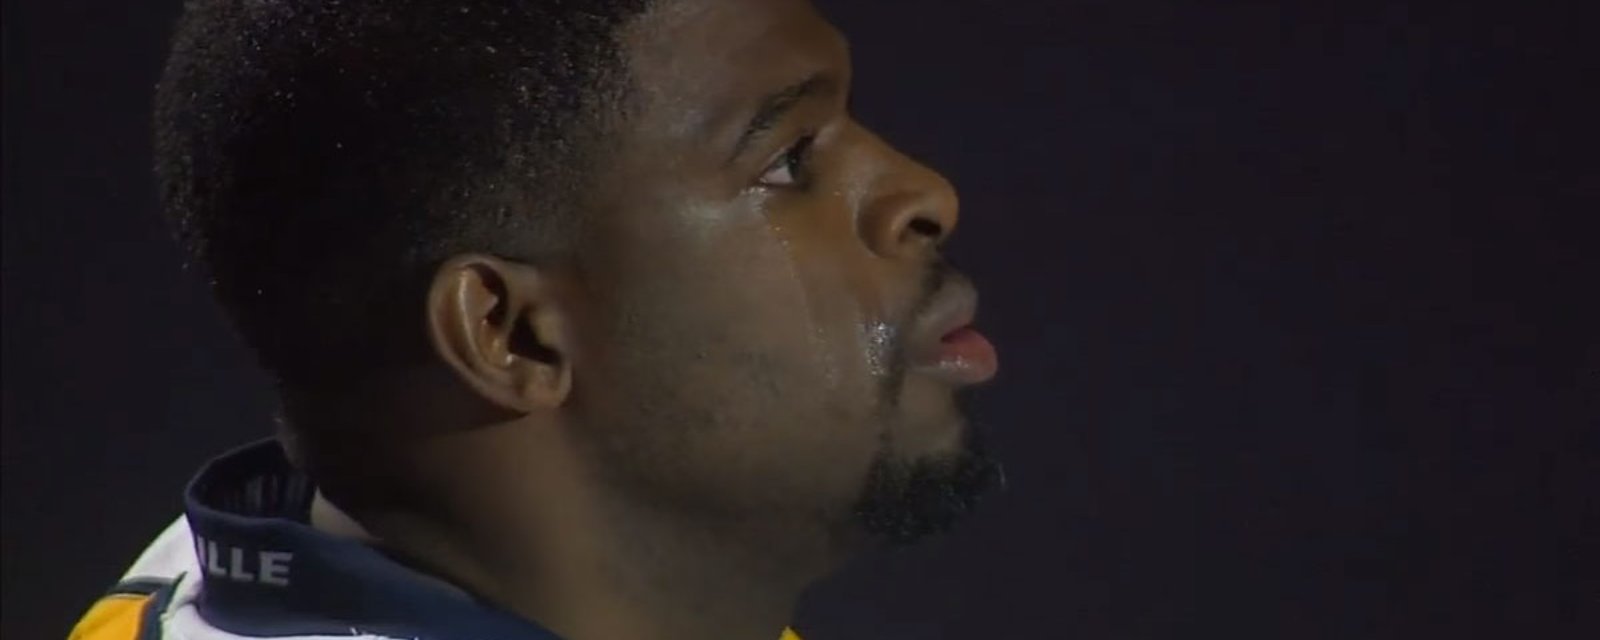 P.K. Subban bids farewell to Fisher in a very emotional way!